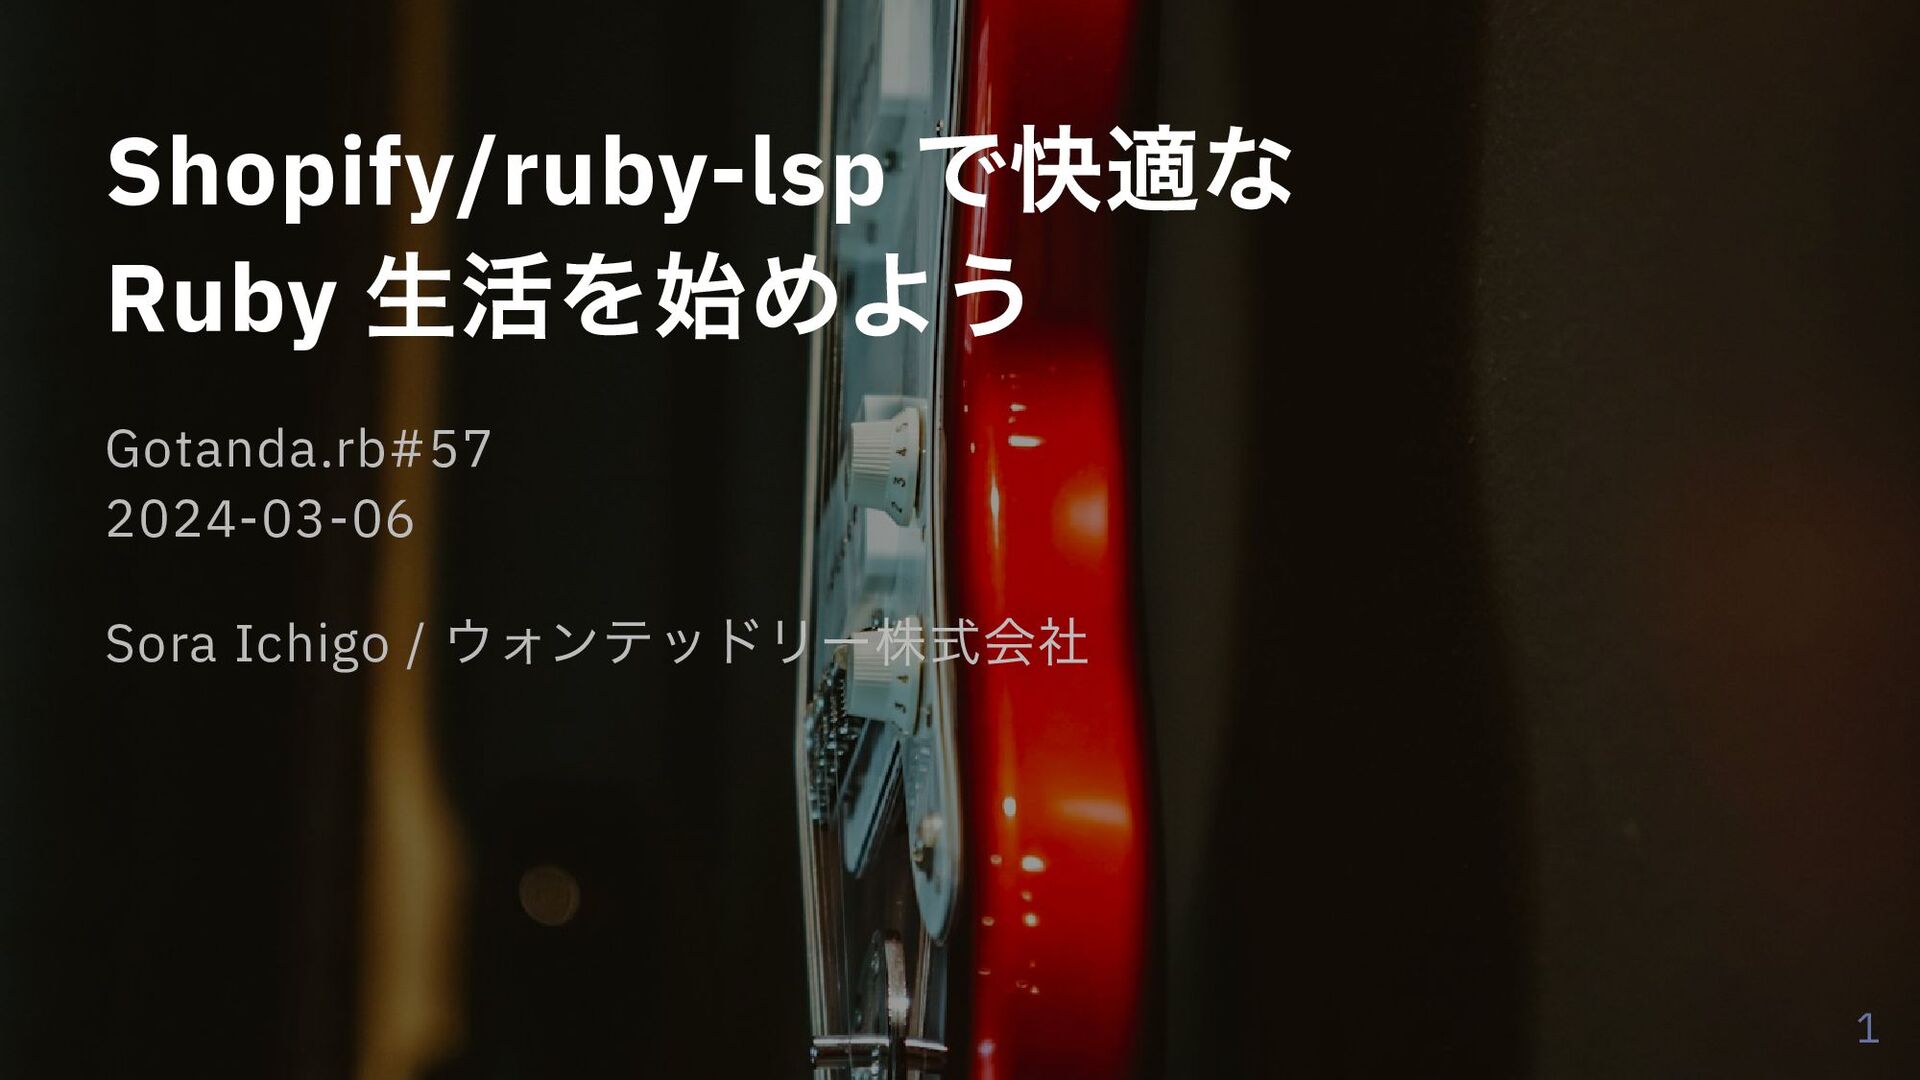 Shopify/ruby-lsp で快適な Ruby 生活を始めよう / introduction-shopify-ruby-lsp